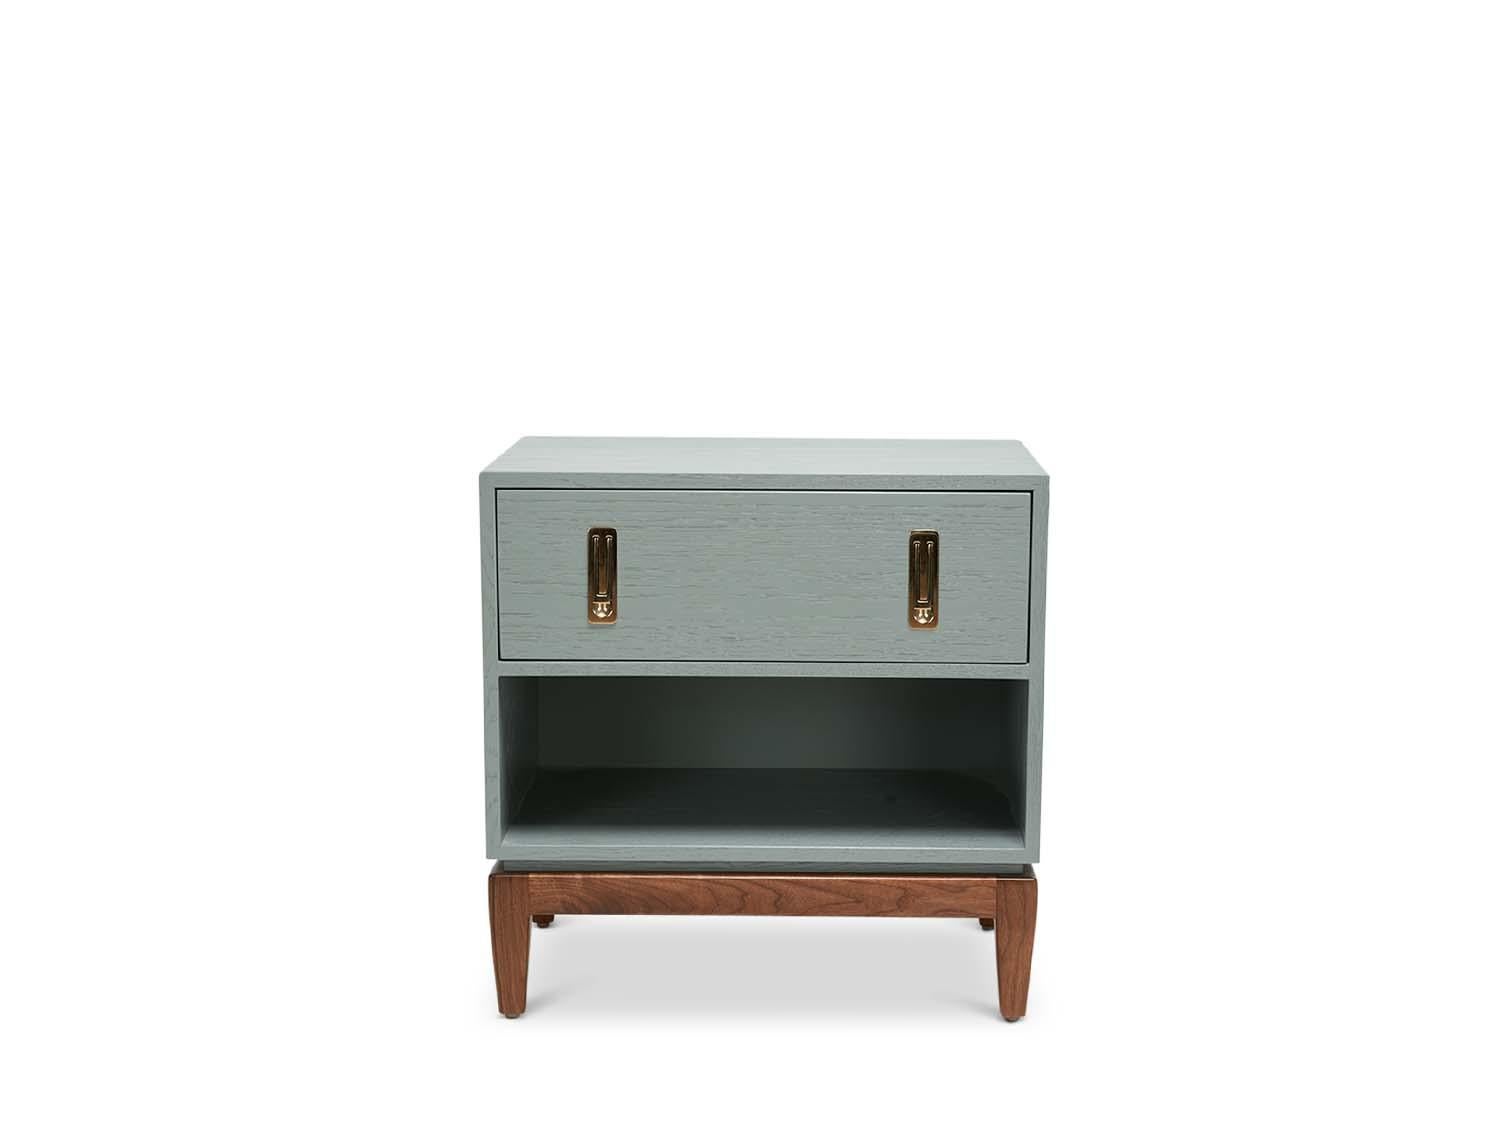 The Arcadia side table features one or two drawers, an open shelf, hand crafted vintage style hardware and a sculptural solid American walnut or white oak base.

The Lawson-Fenning Collection is designed and handmade in Los Angeles, California.